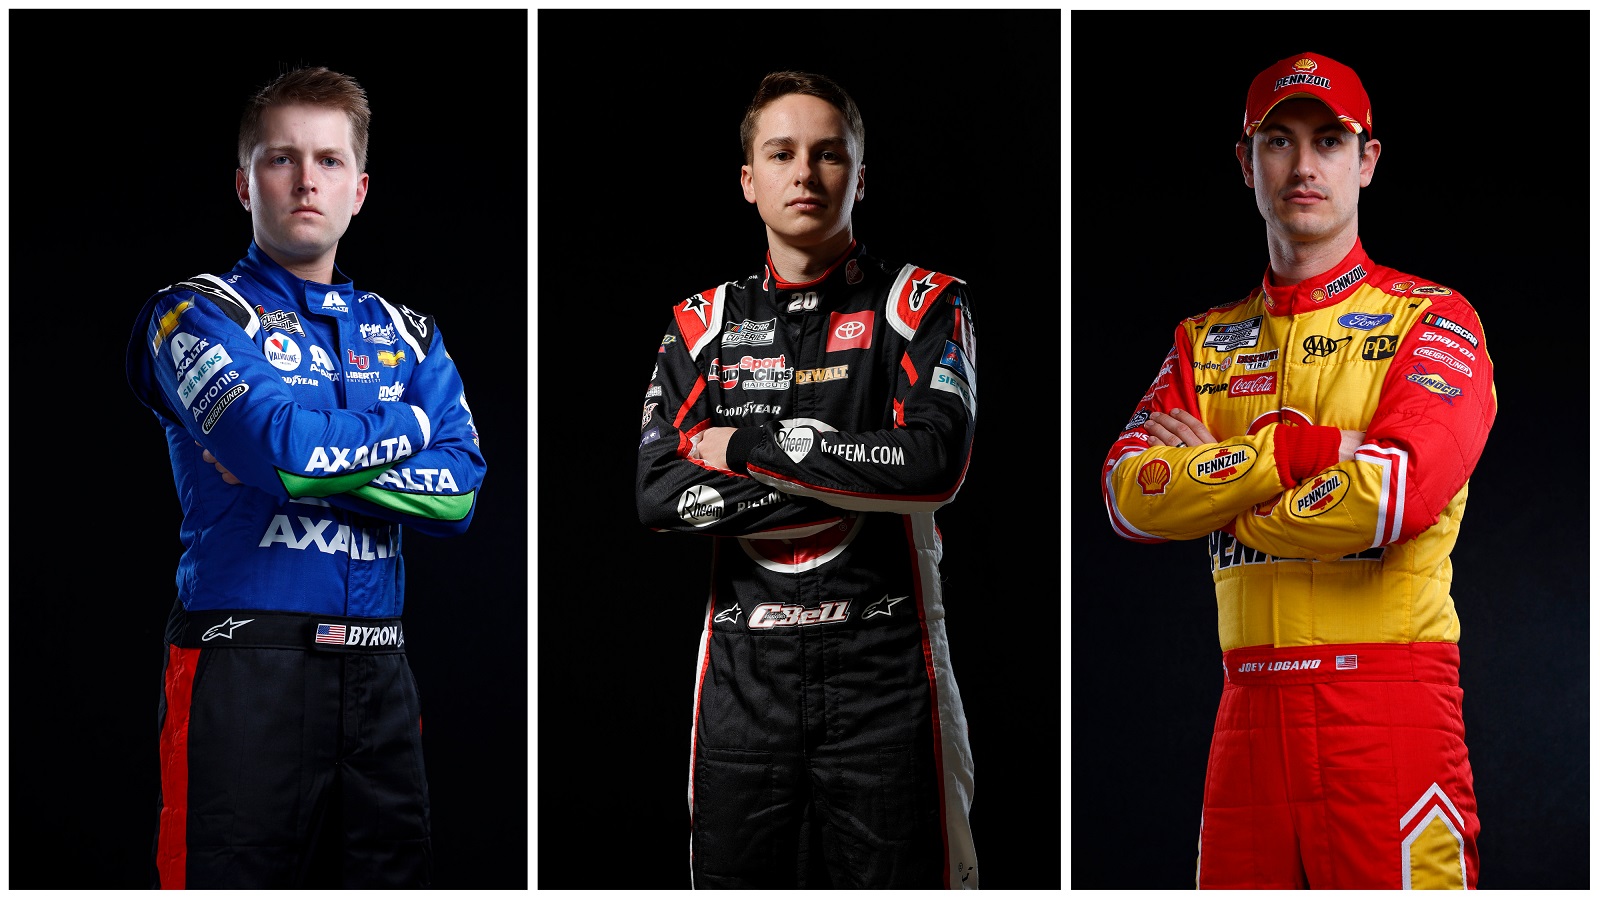 William Byron, Christopher Bell and Joey Logano, semifinalists in the NASCAR Cup Series playoffs. | Getty Images